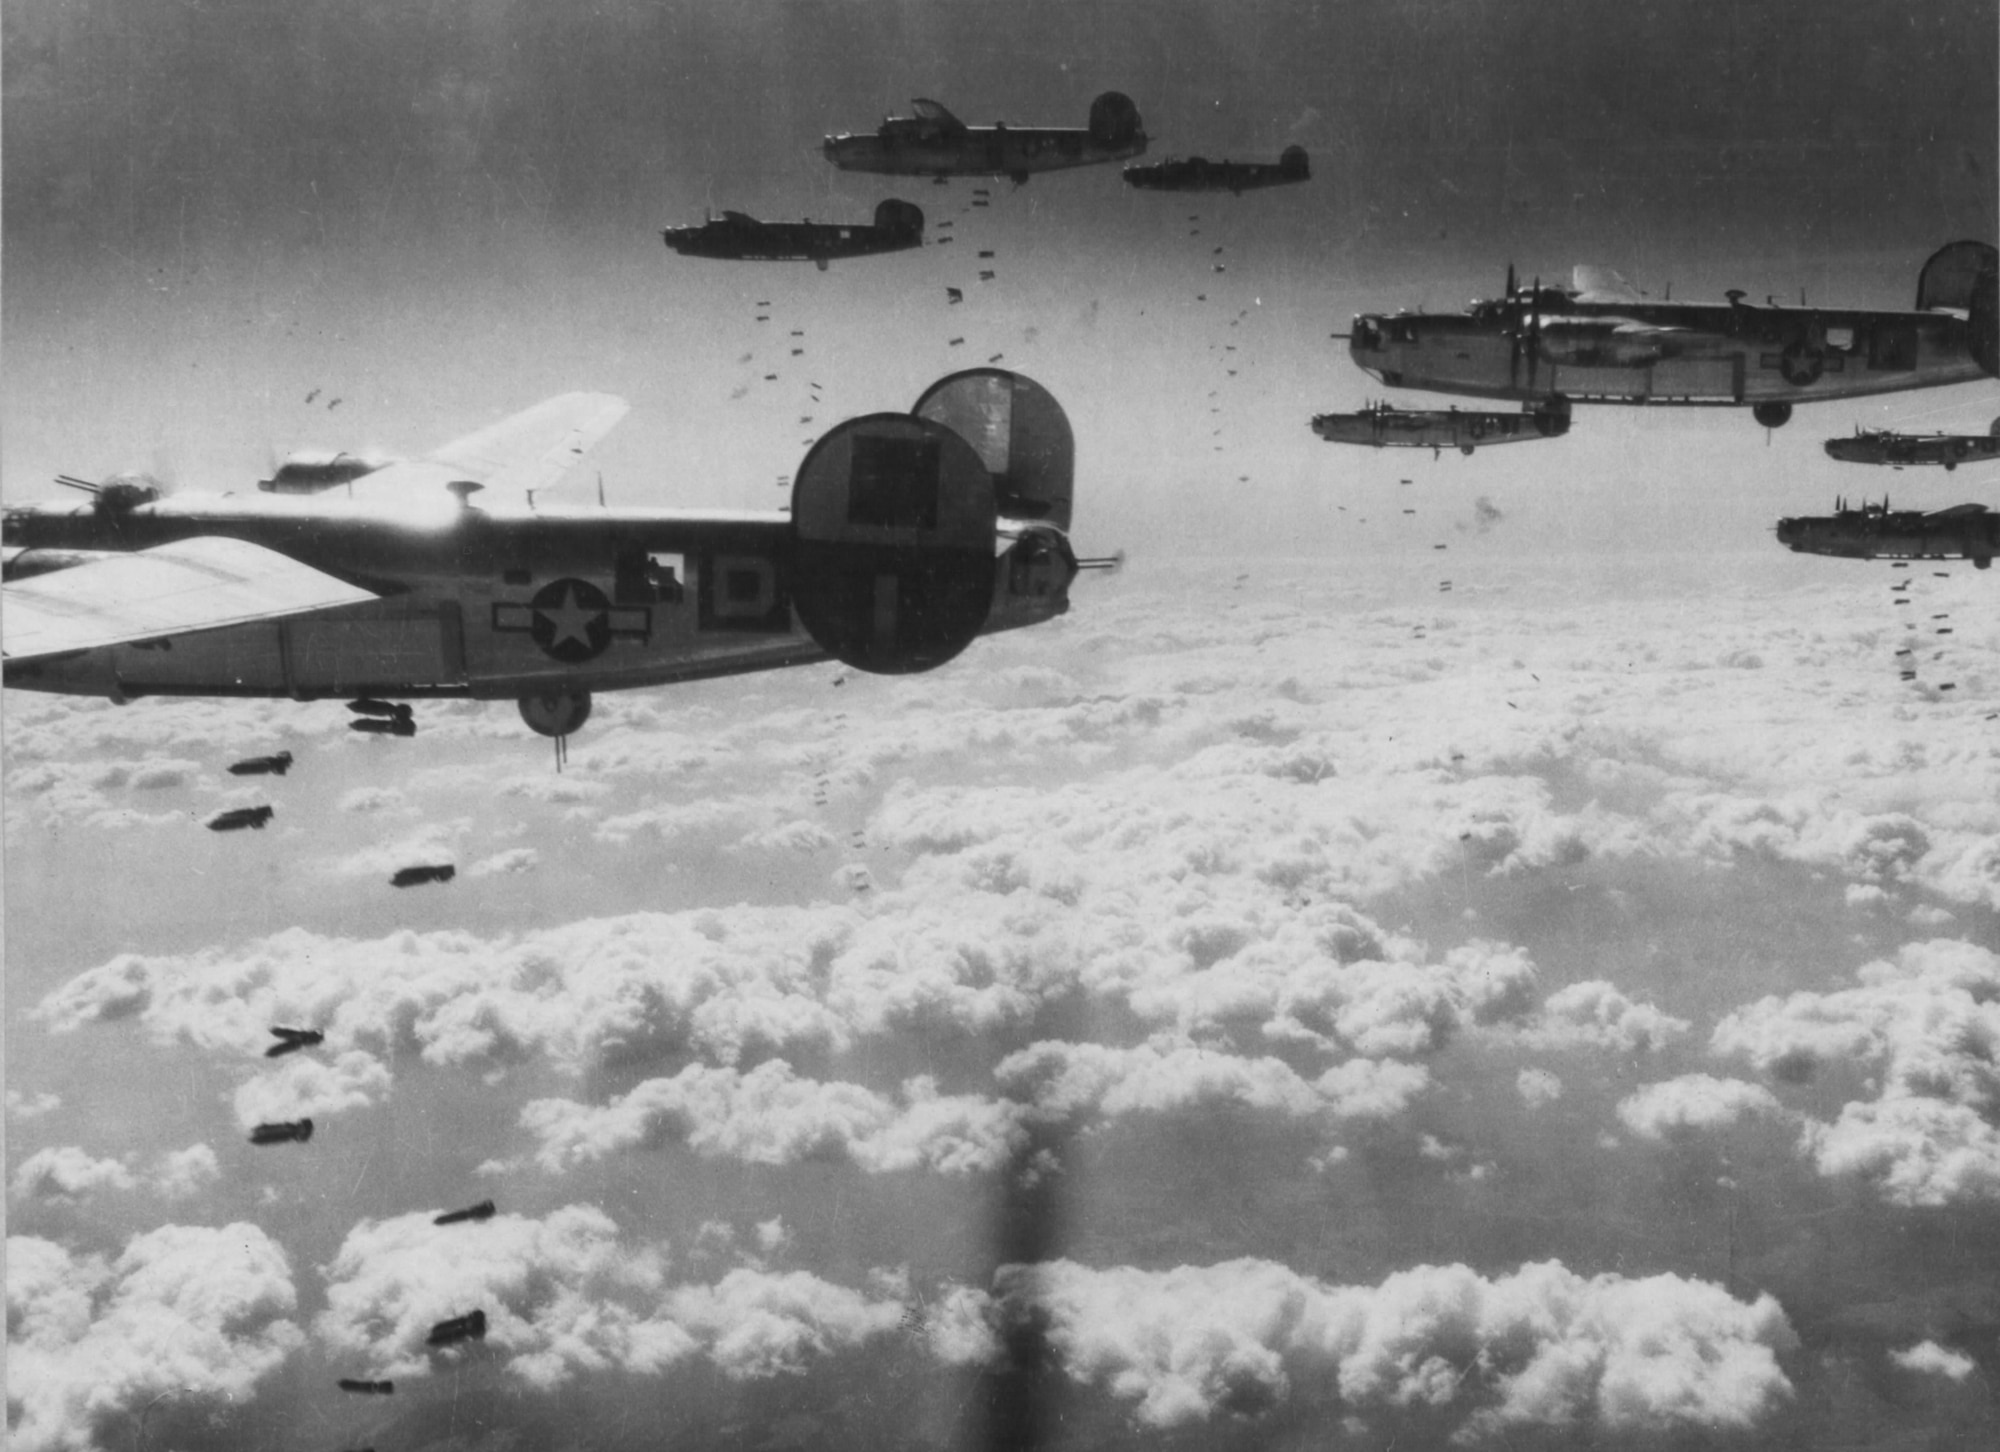 Strategic bombing campaign in Europe during World War II.